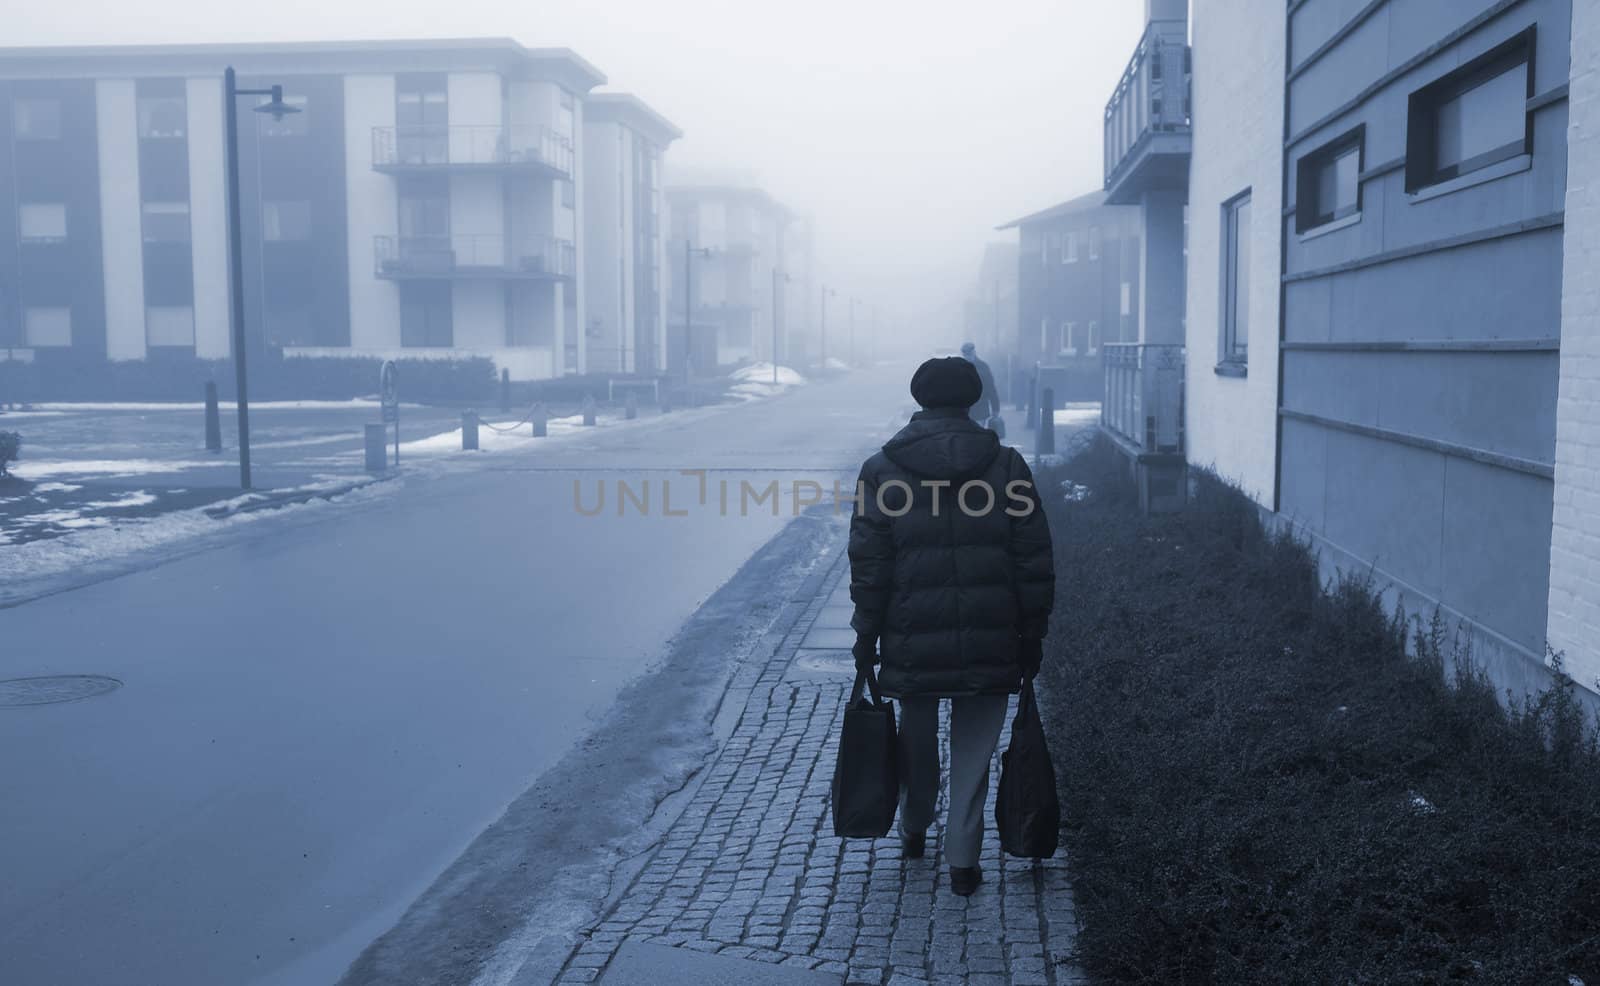 Elderly woman on her way home after the daily shopping - Denmark.